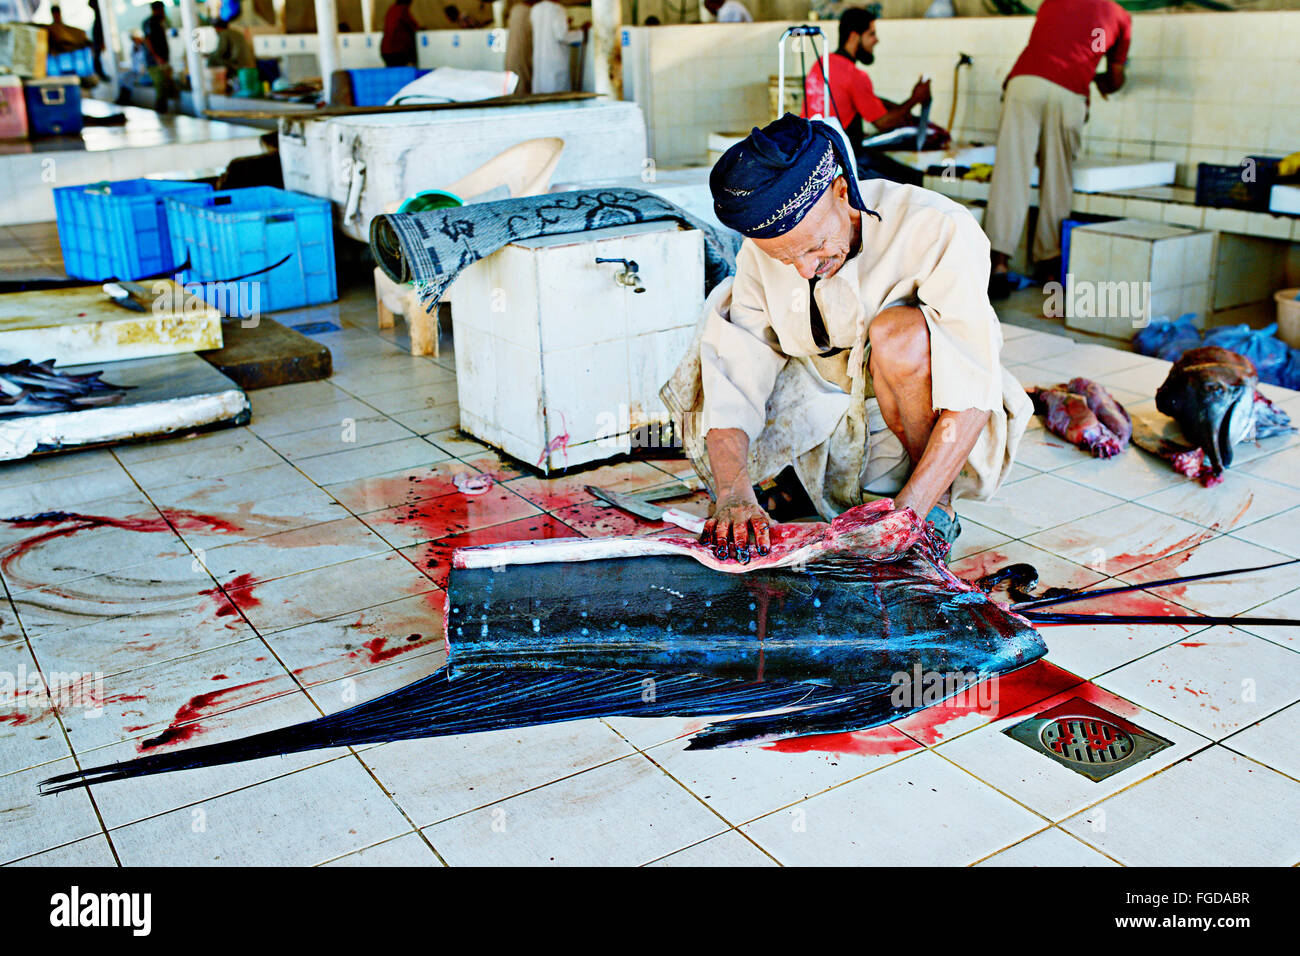 Man cutting a sailfish at fish market in Muscat, the capital of Oman. Stock Photo